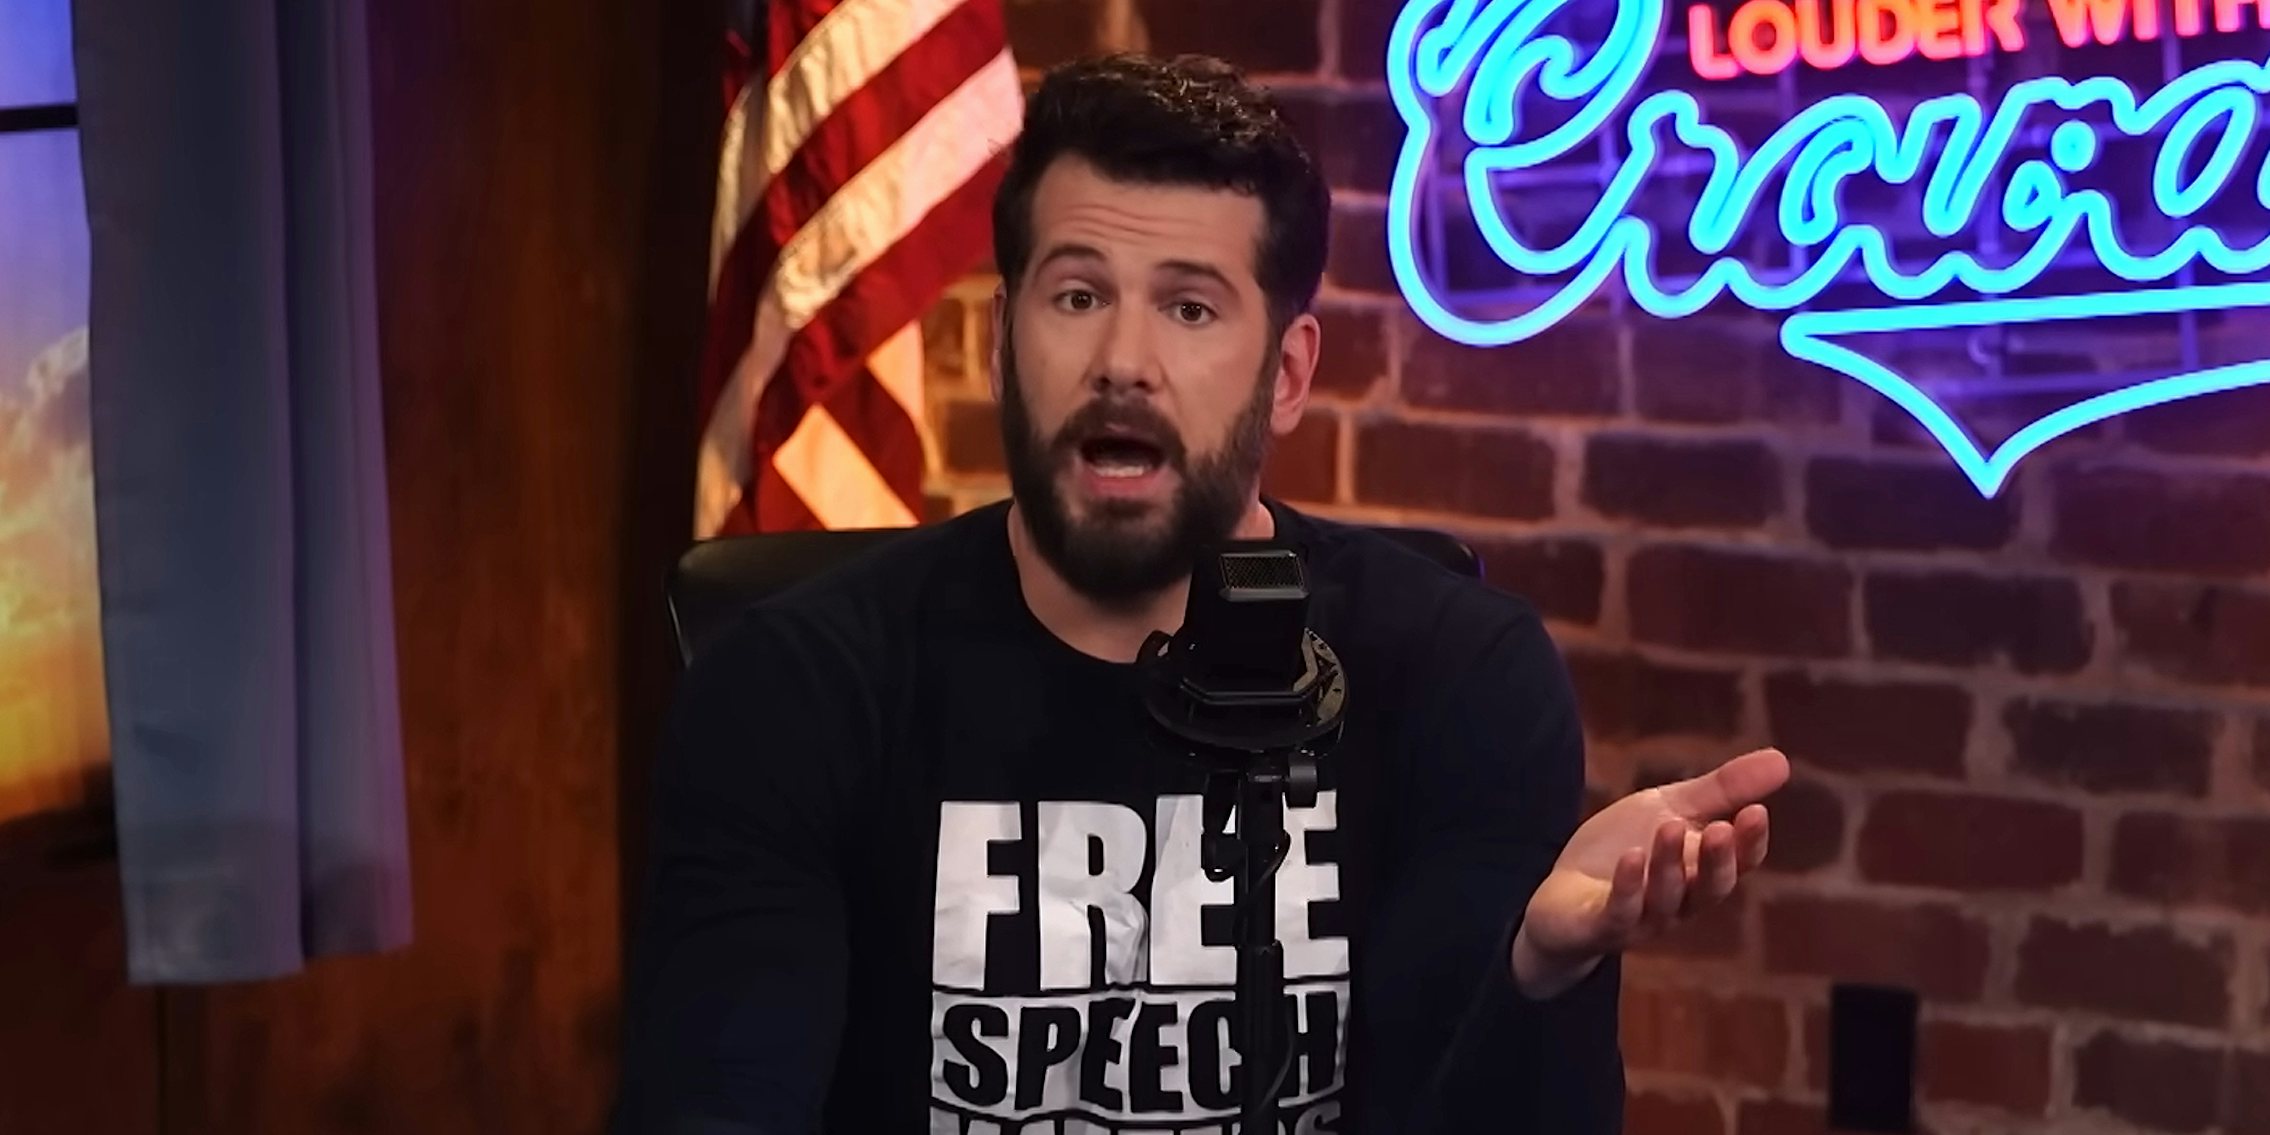 Heartbroken Steven Crowder announces he and wife Hilary are going through a  'horrendous divorce